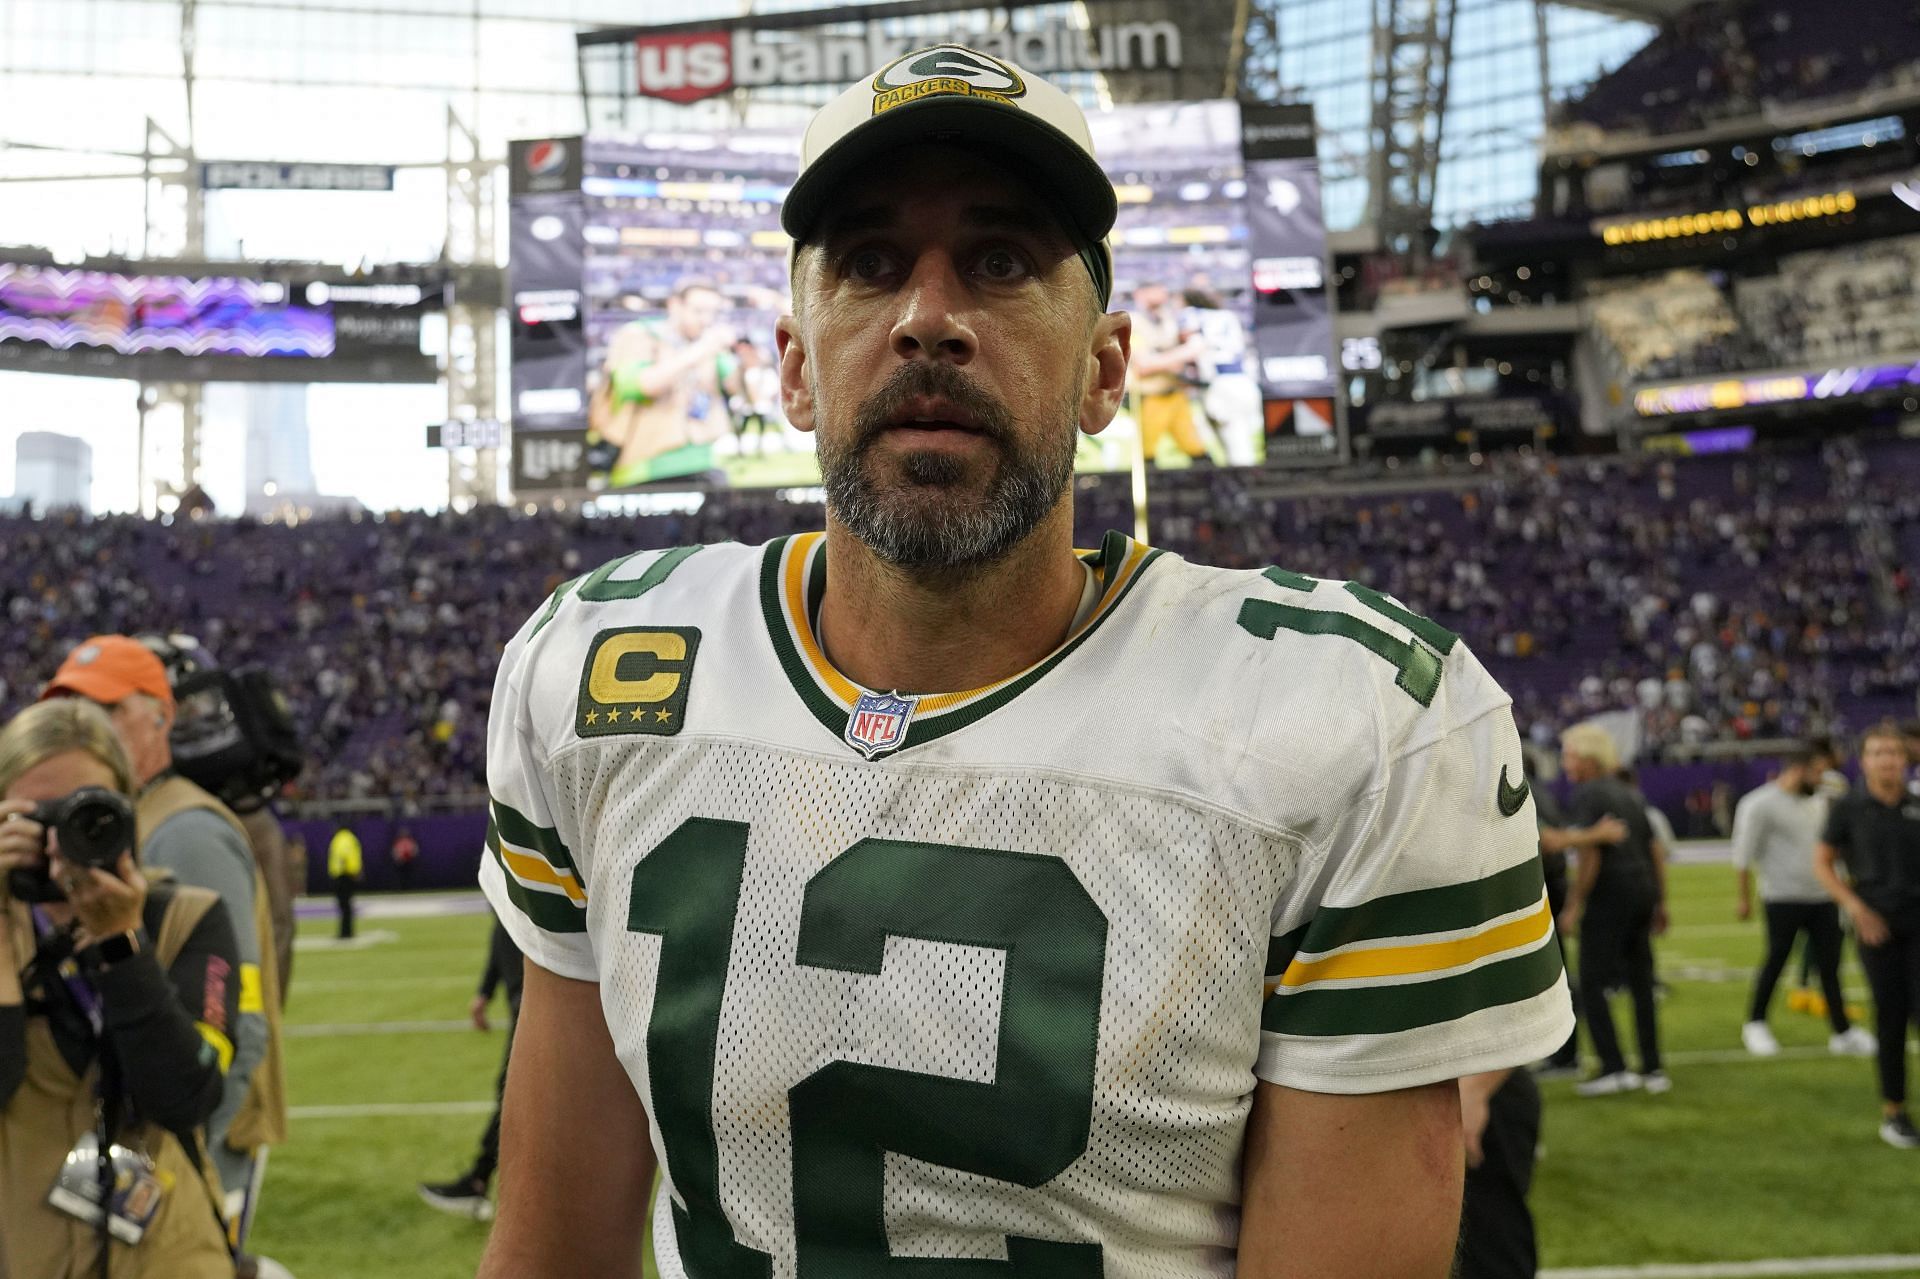 Aaron Rodgers of the Green Bay Packers endured a sub-par outing against the Minnesota Vikings